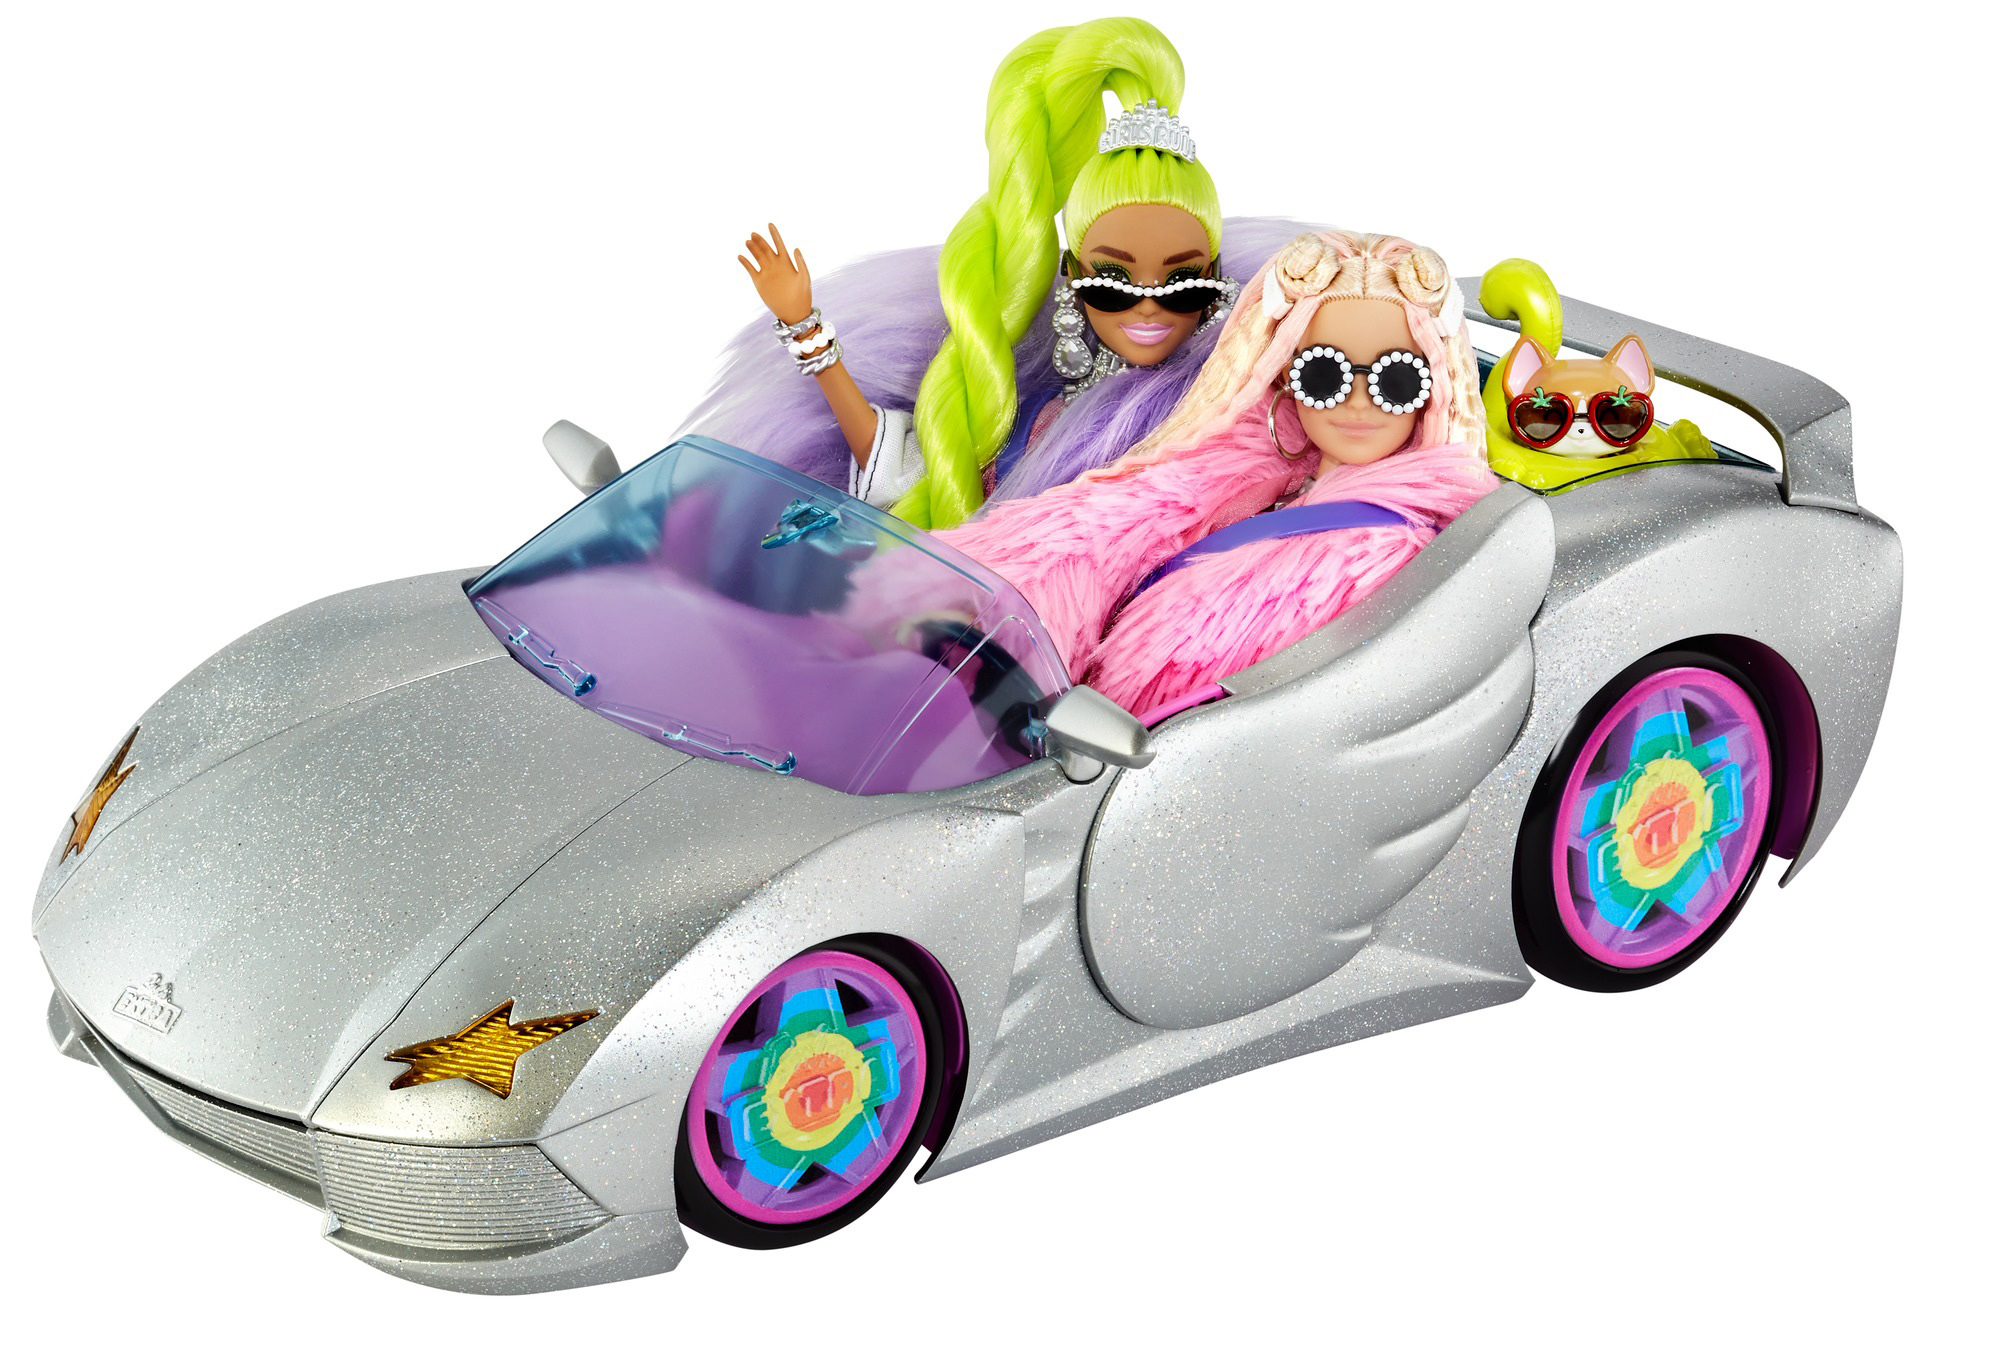 Barbie Extra Vehicle sparkly silver 2seater car with rolling wheels